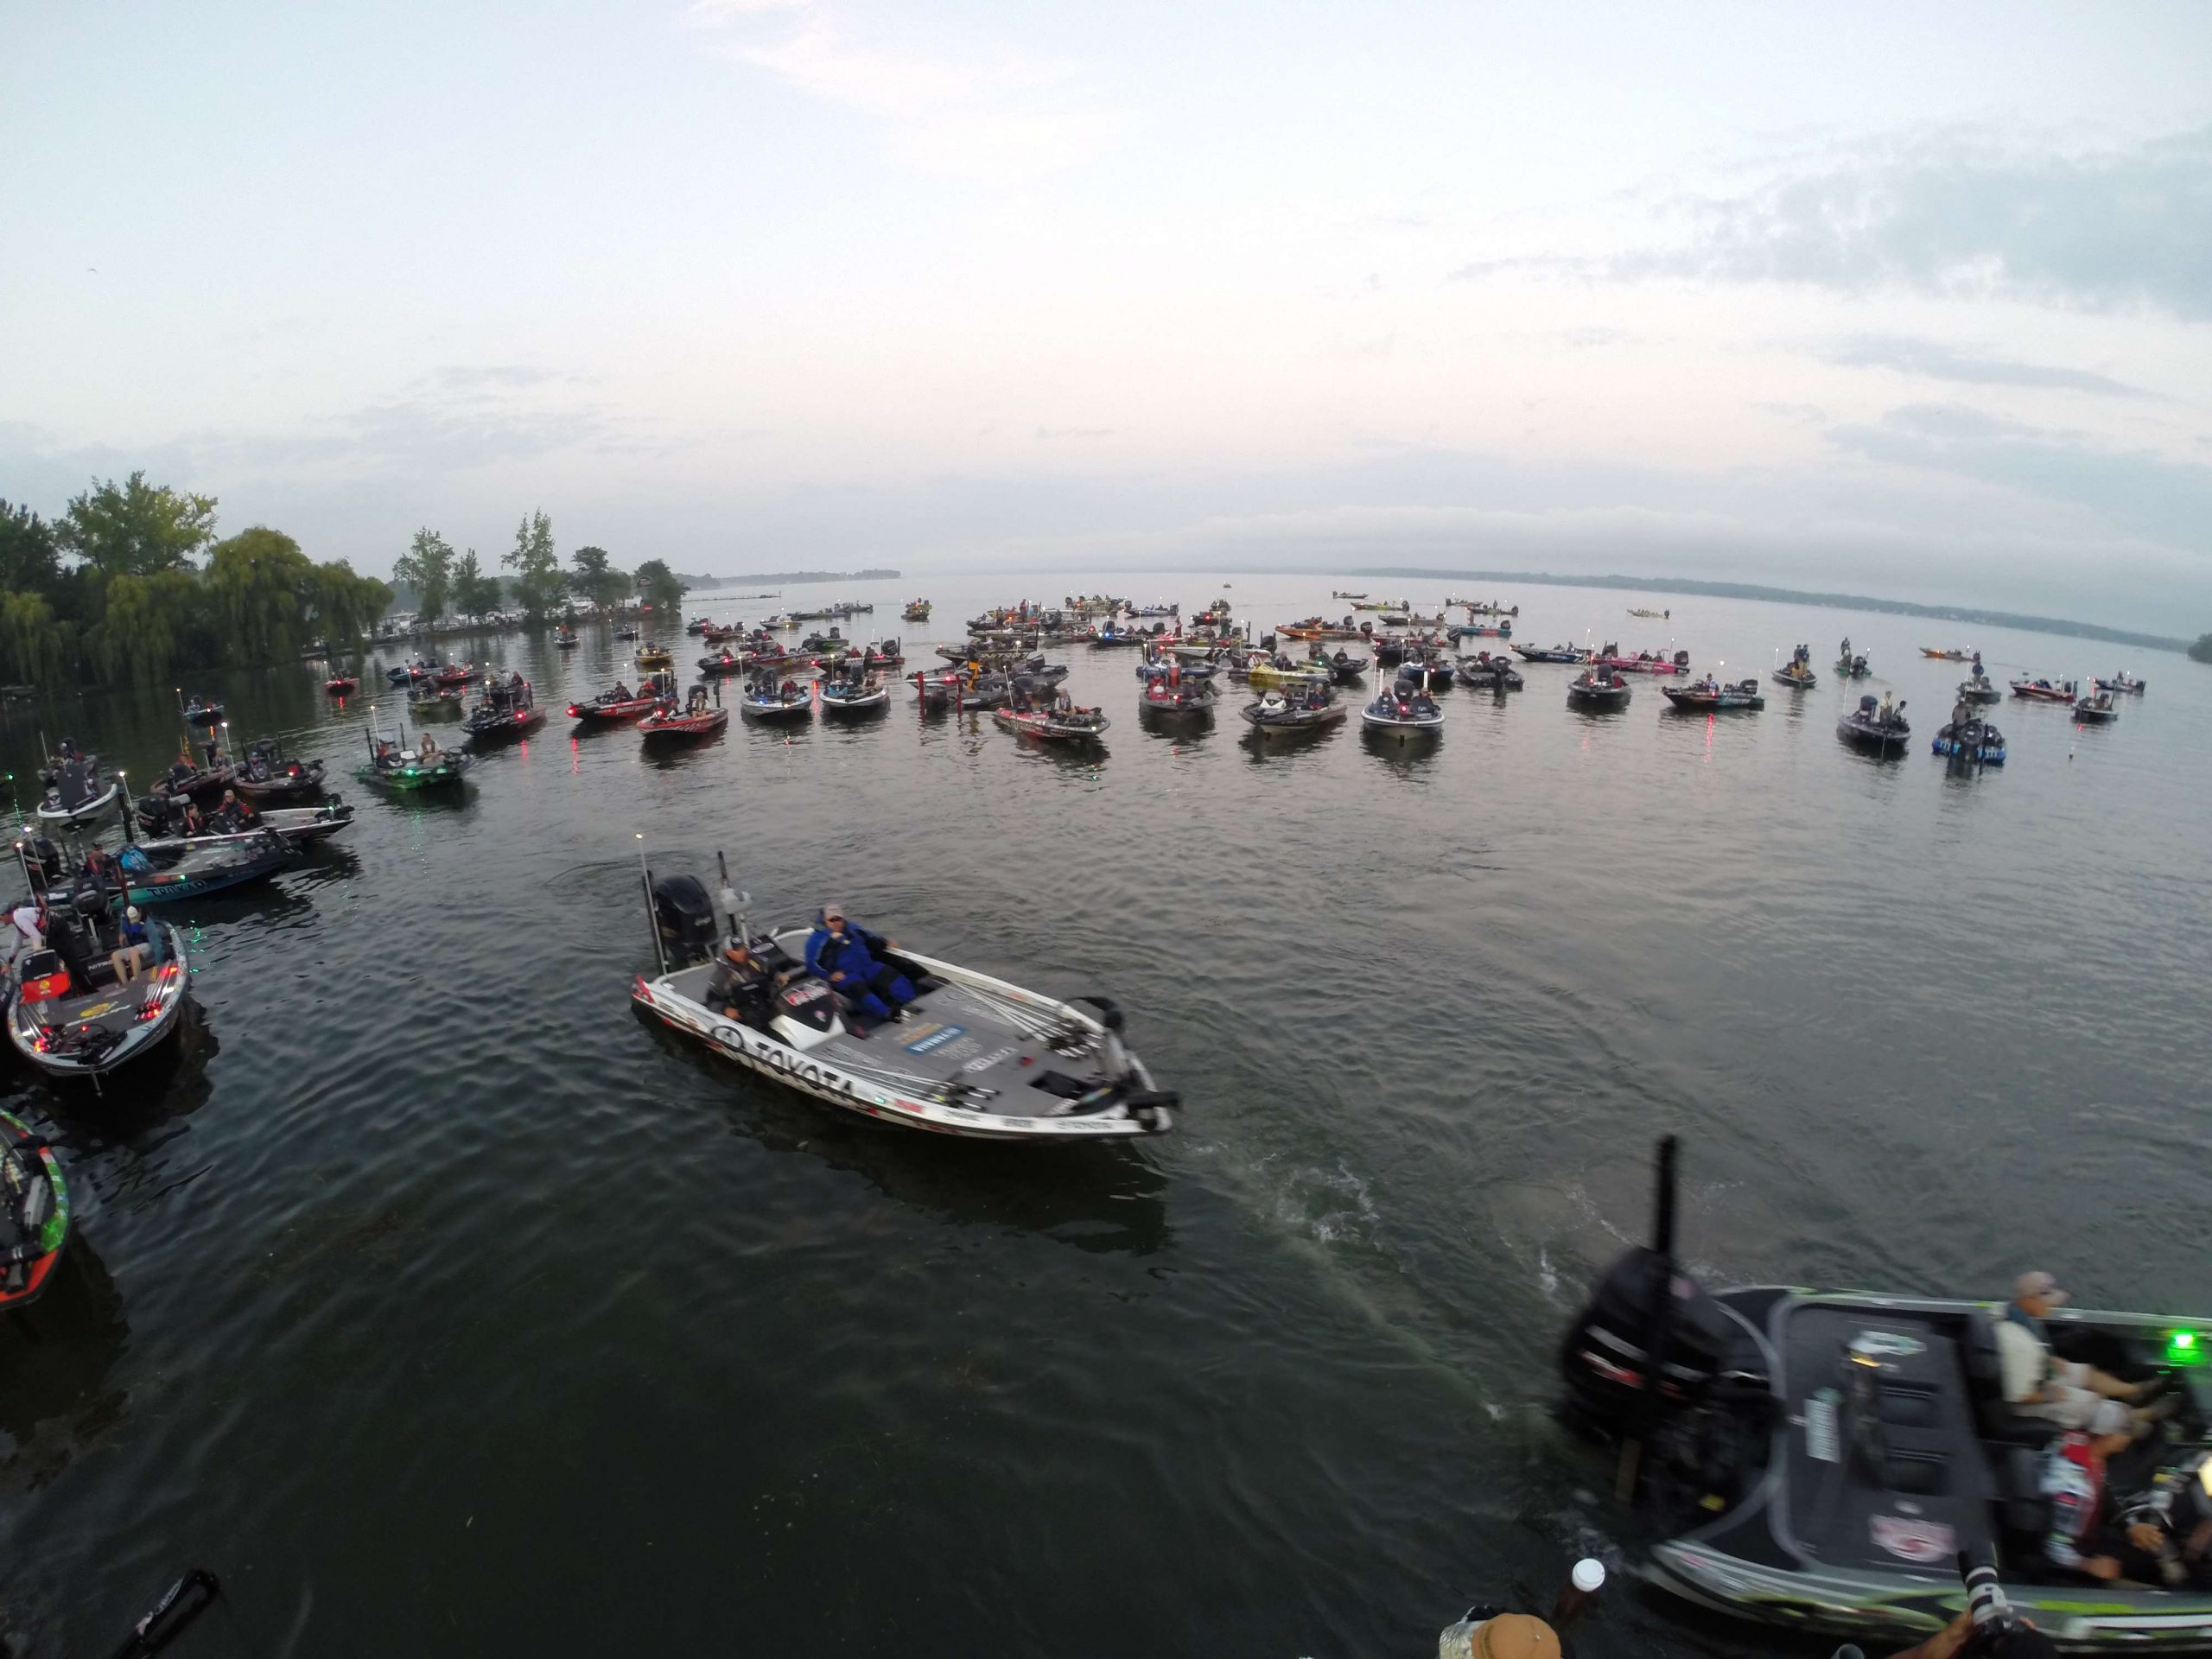 Day 2 take-off for the A.R.E. Truck Caps Bassmaster Elite at Cayuga Lake gets underway. 